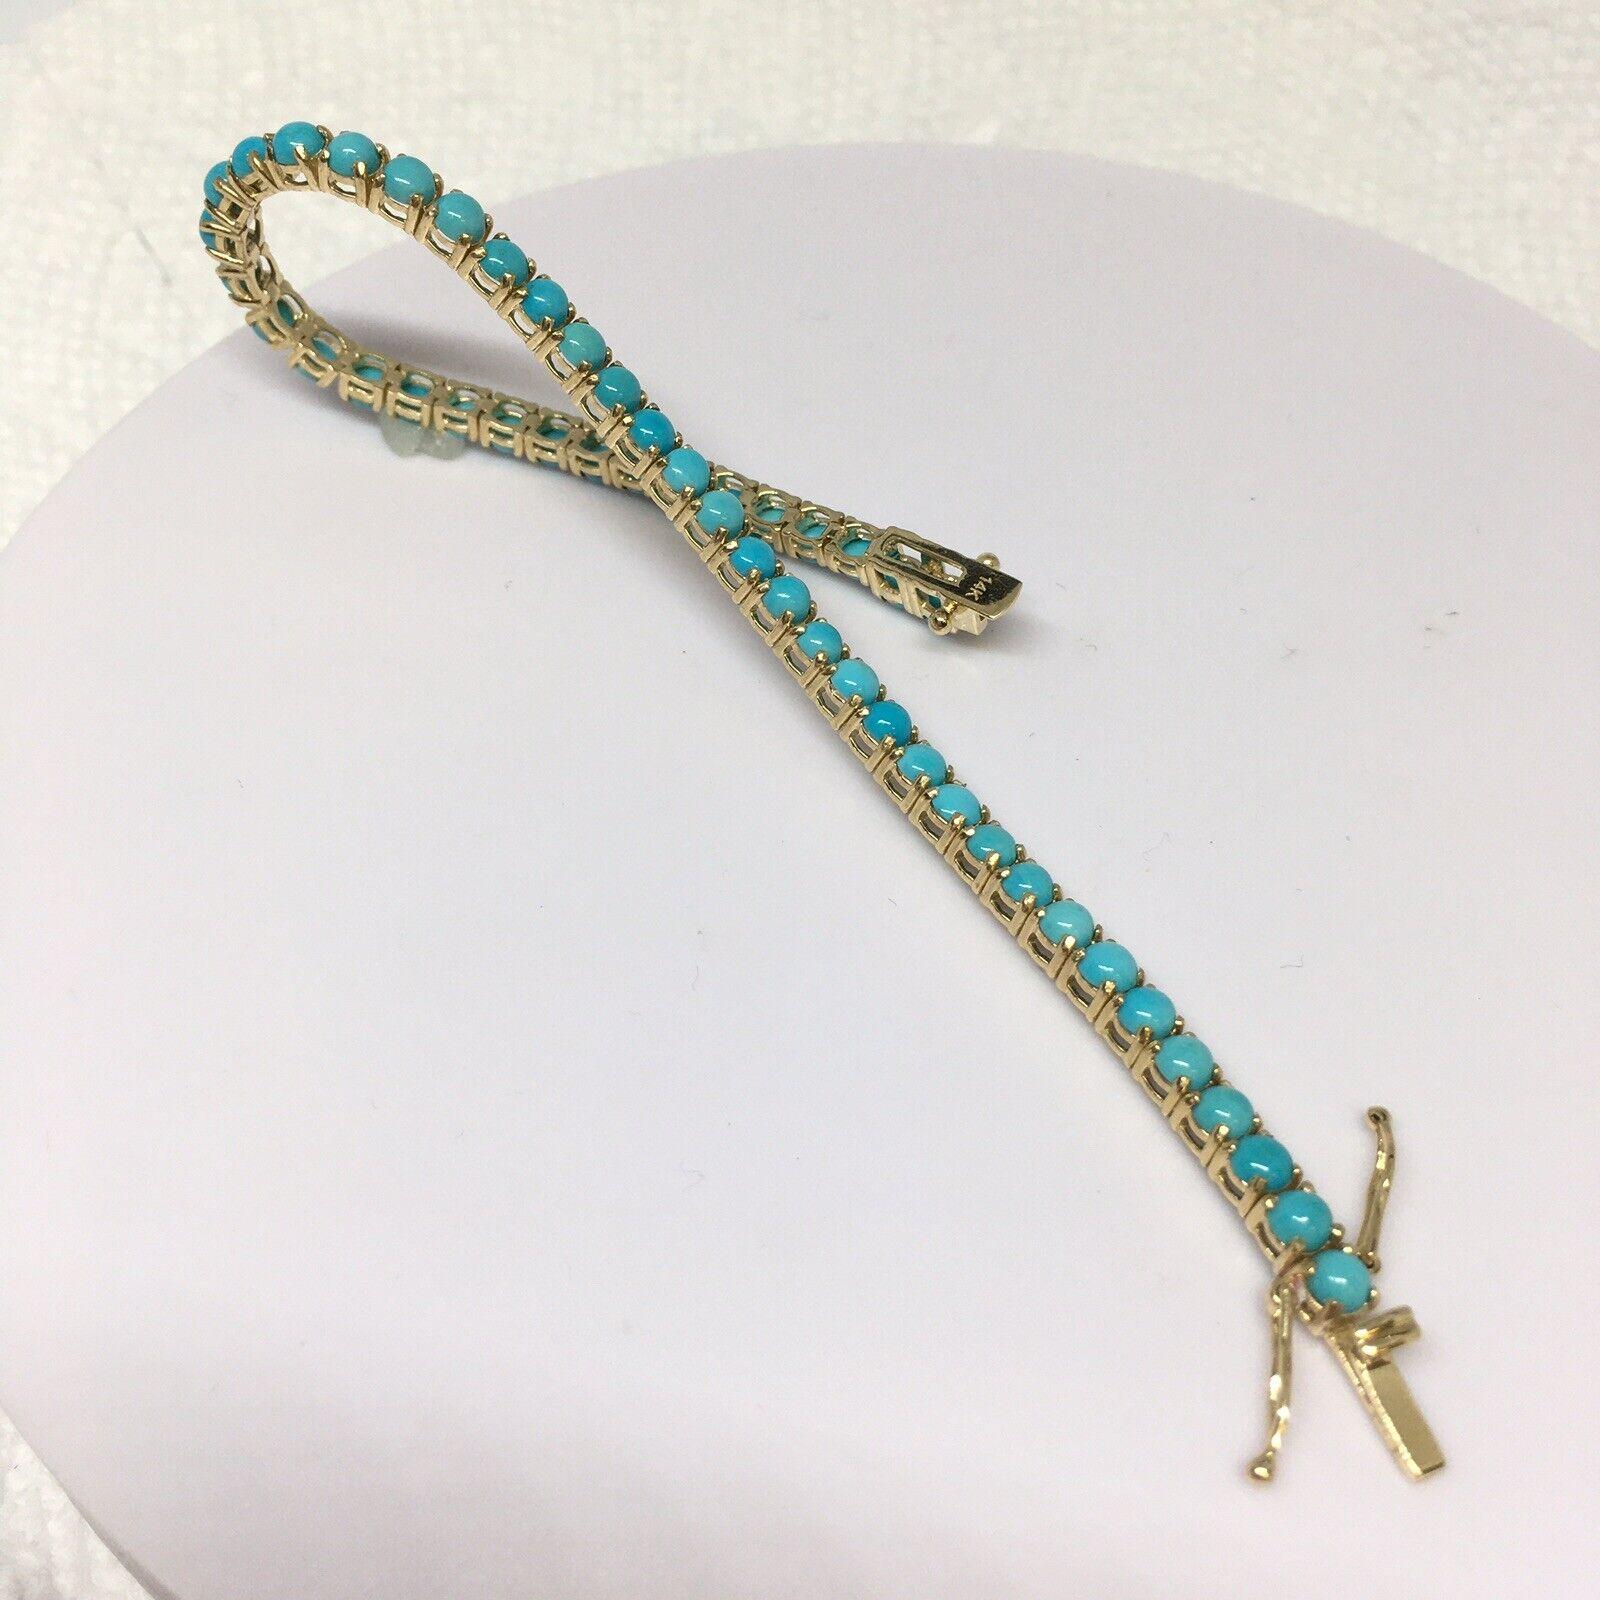 3.5 mm Round Cabochon Natural Arizona Turquoise 14k Yellow Gold Tennis Bracelet


Weighting 10.5 gram made of 14K solid gold

Natural Mined Arizona 3.5 mm Round Cabochon Cut Turquoise

7.25 inch long